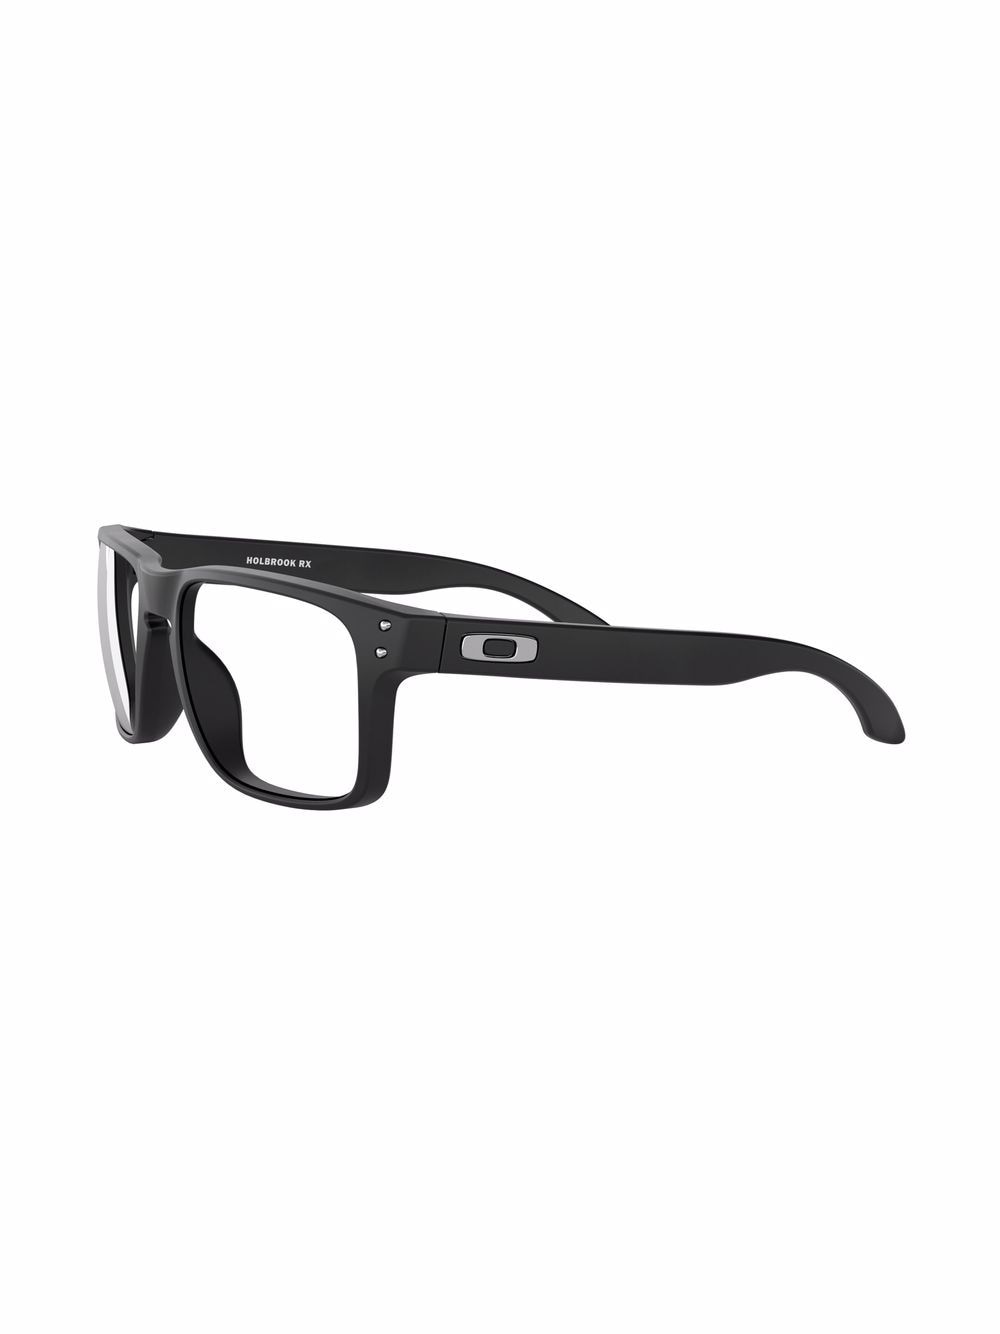 Shop Oakley Holbrook RX square glasses with Express Delivery - FARFETCH